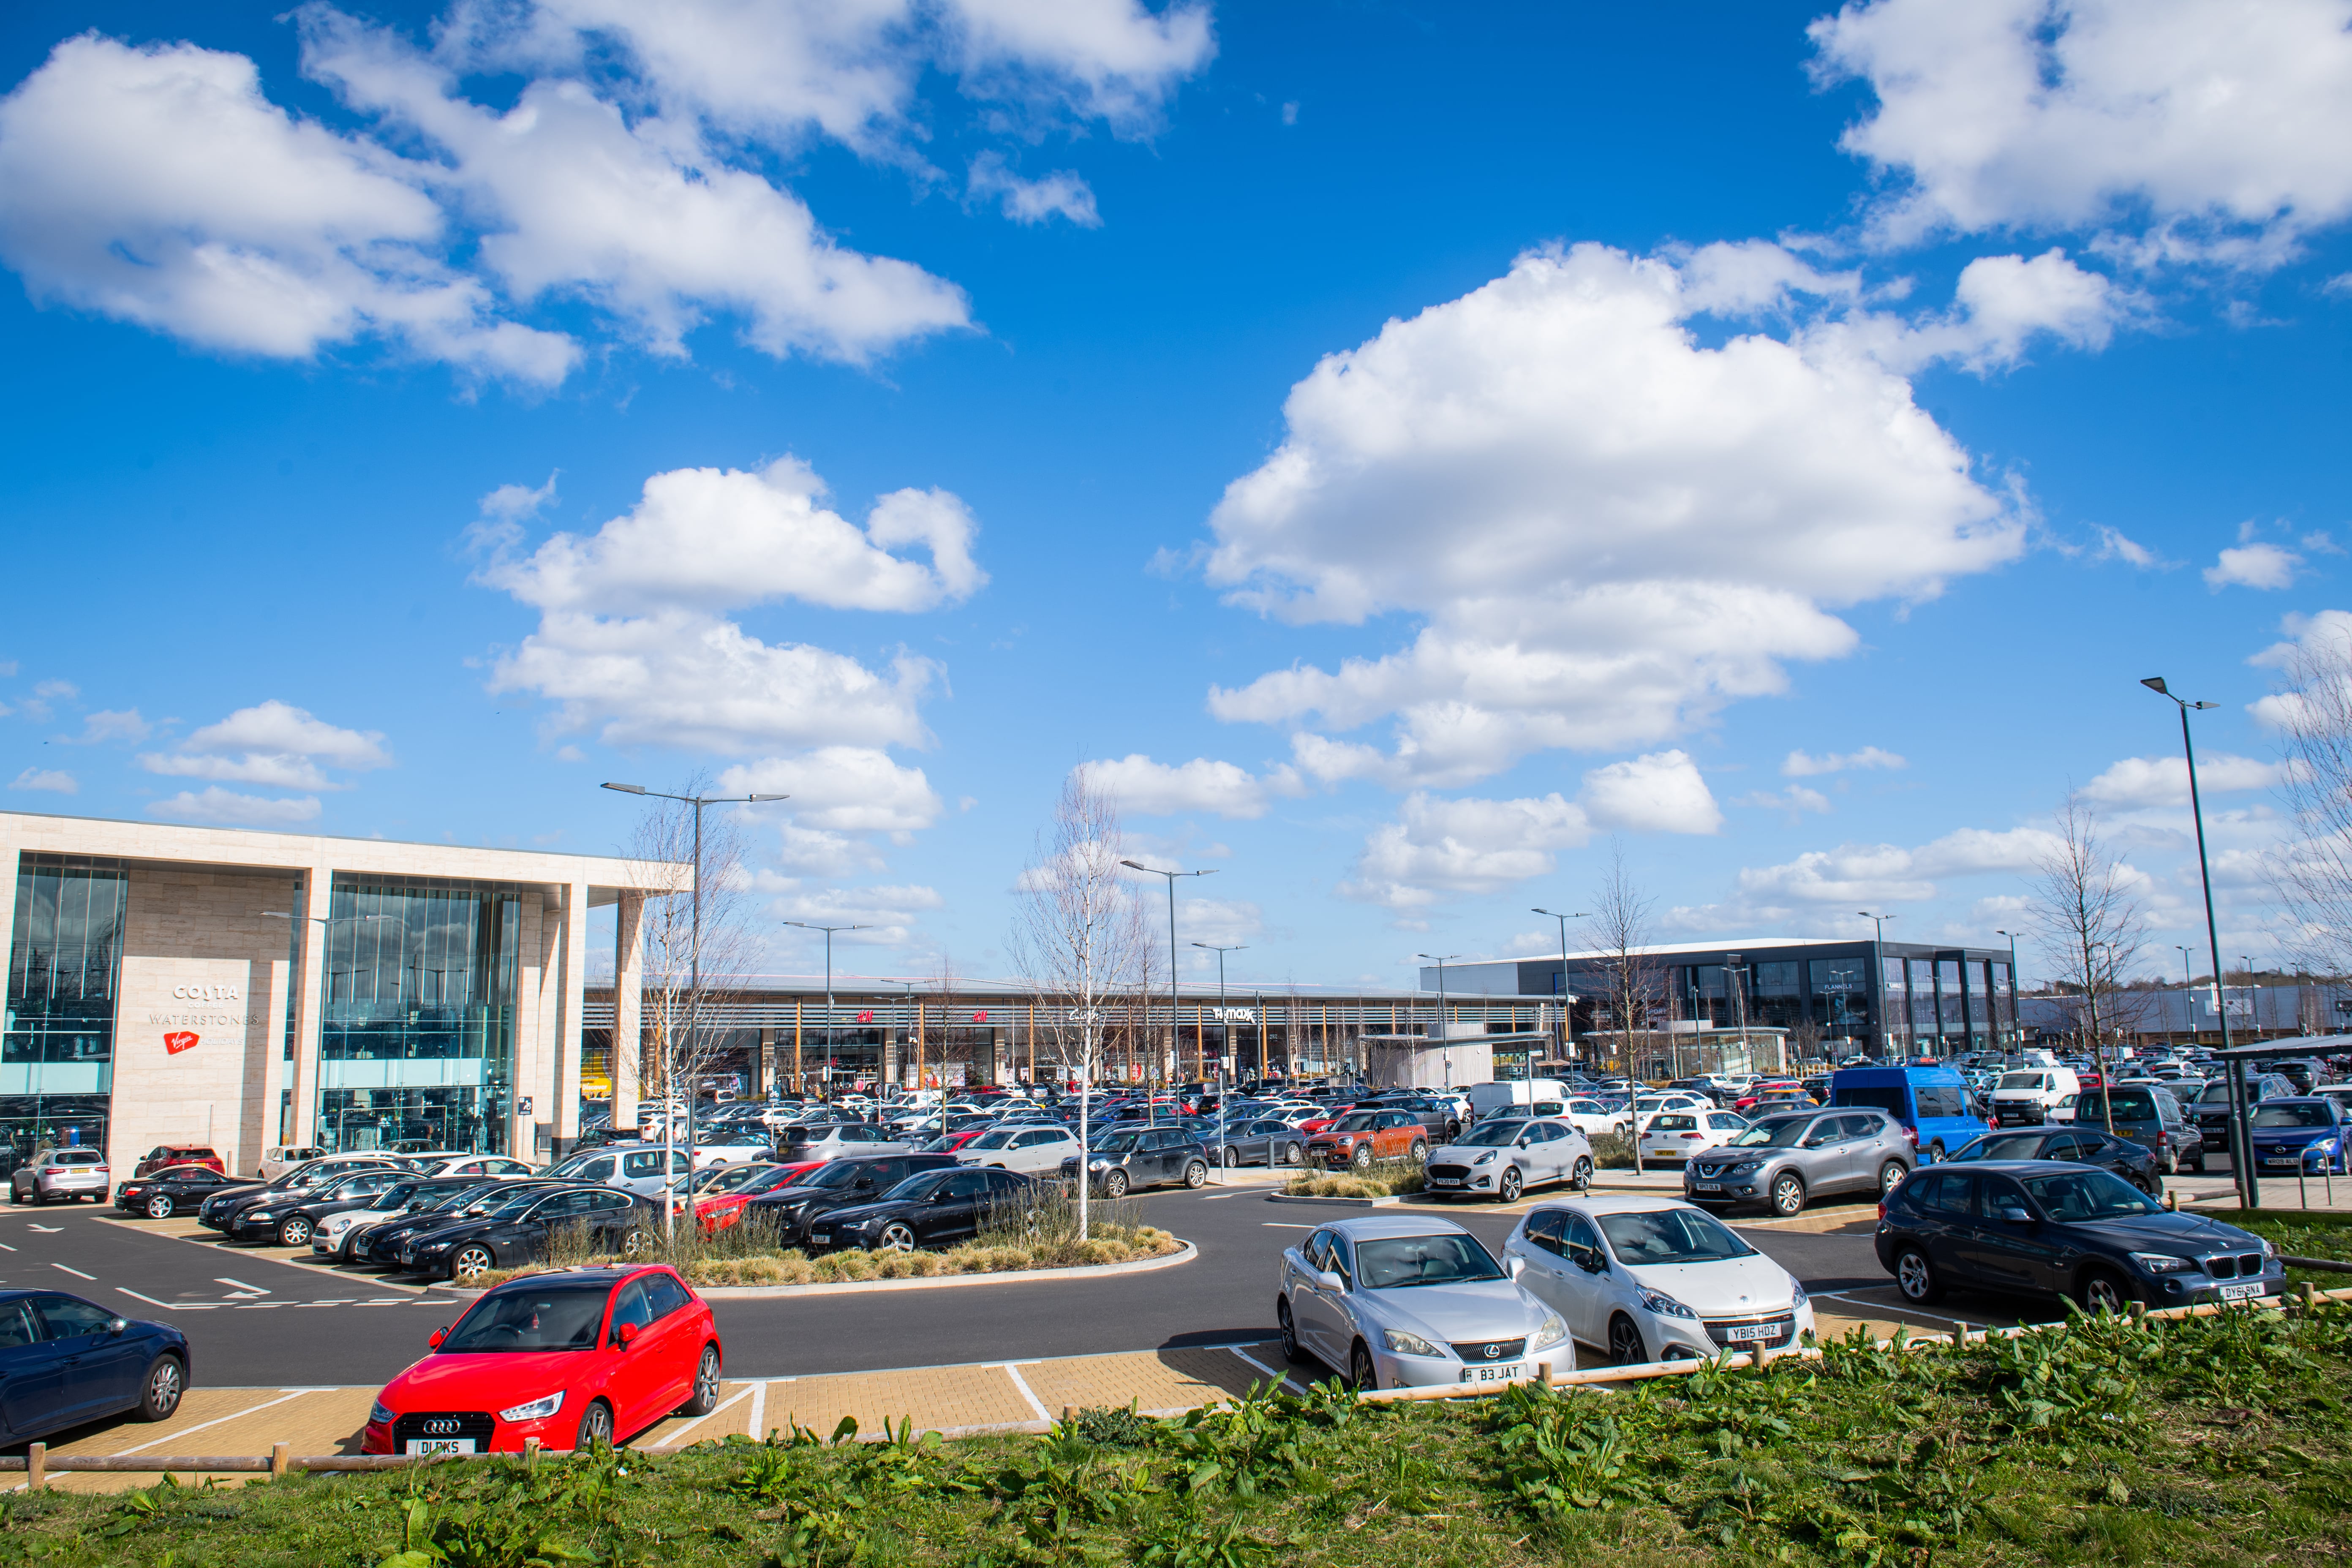 Fosse Park with sunny weather